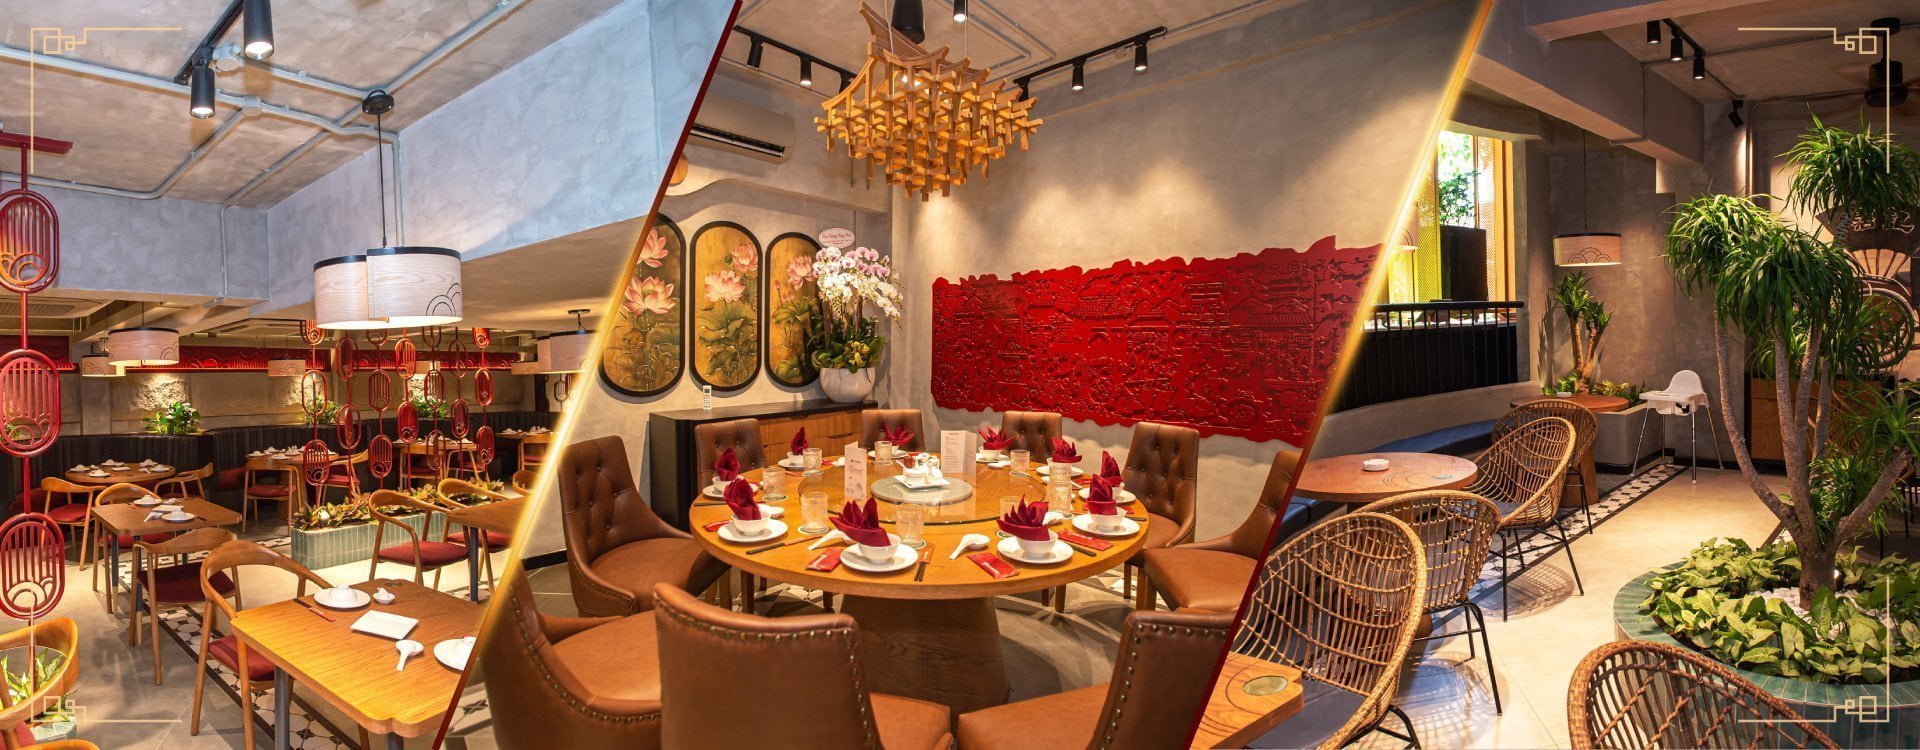 Luxurious, warm space at May Dynasty restaurant